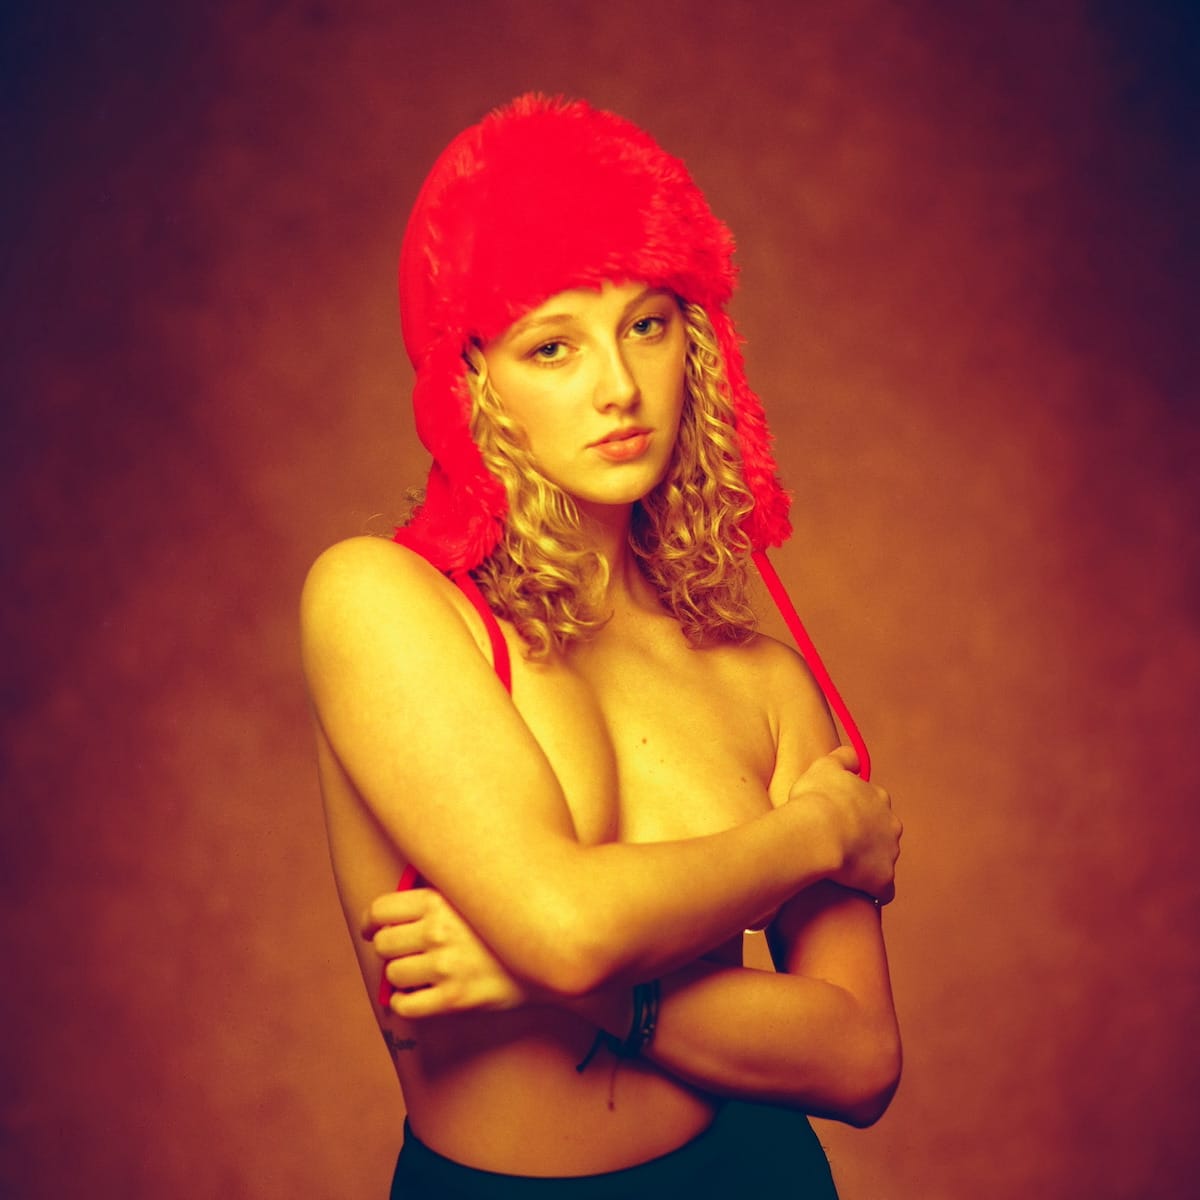 [NSFW] Revisiting Redscale by Cameran.Click